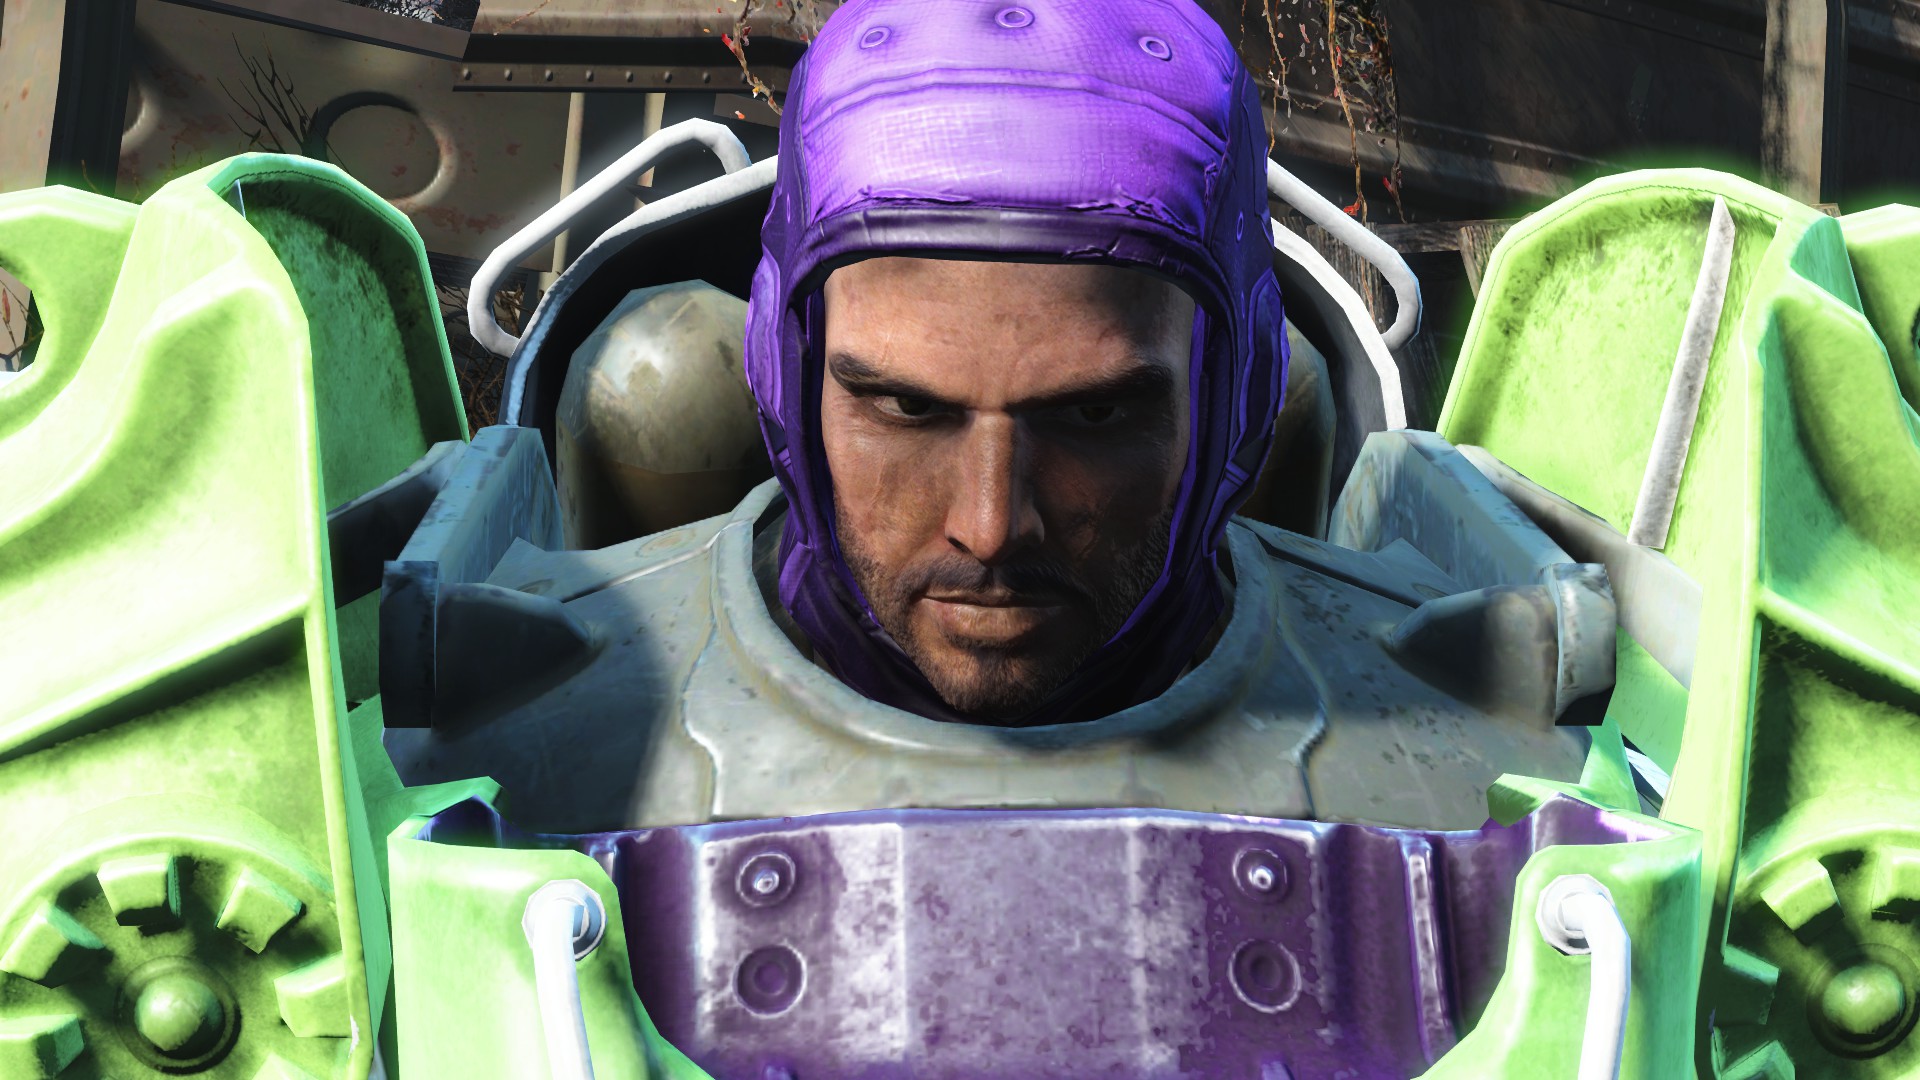 Buzz Lightyear Is The Hero Fallout 4 Deserves